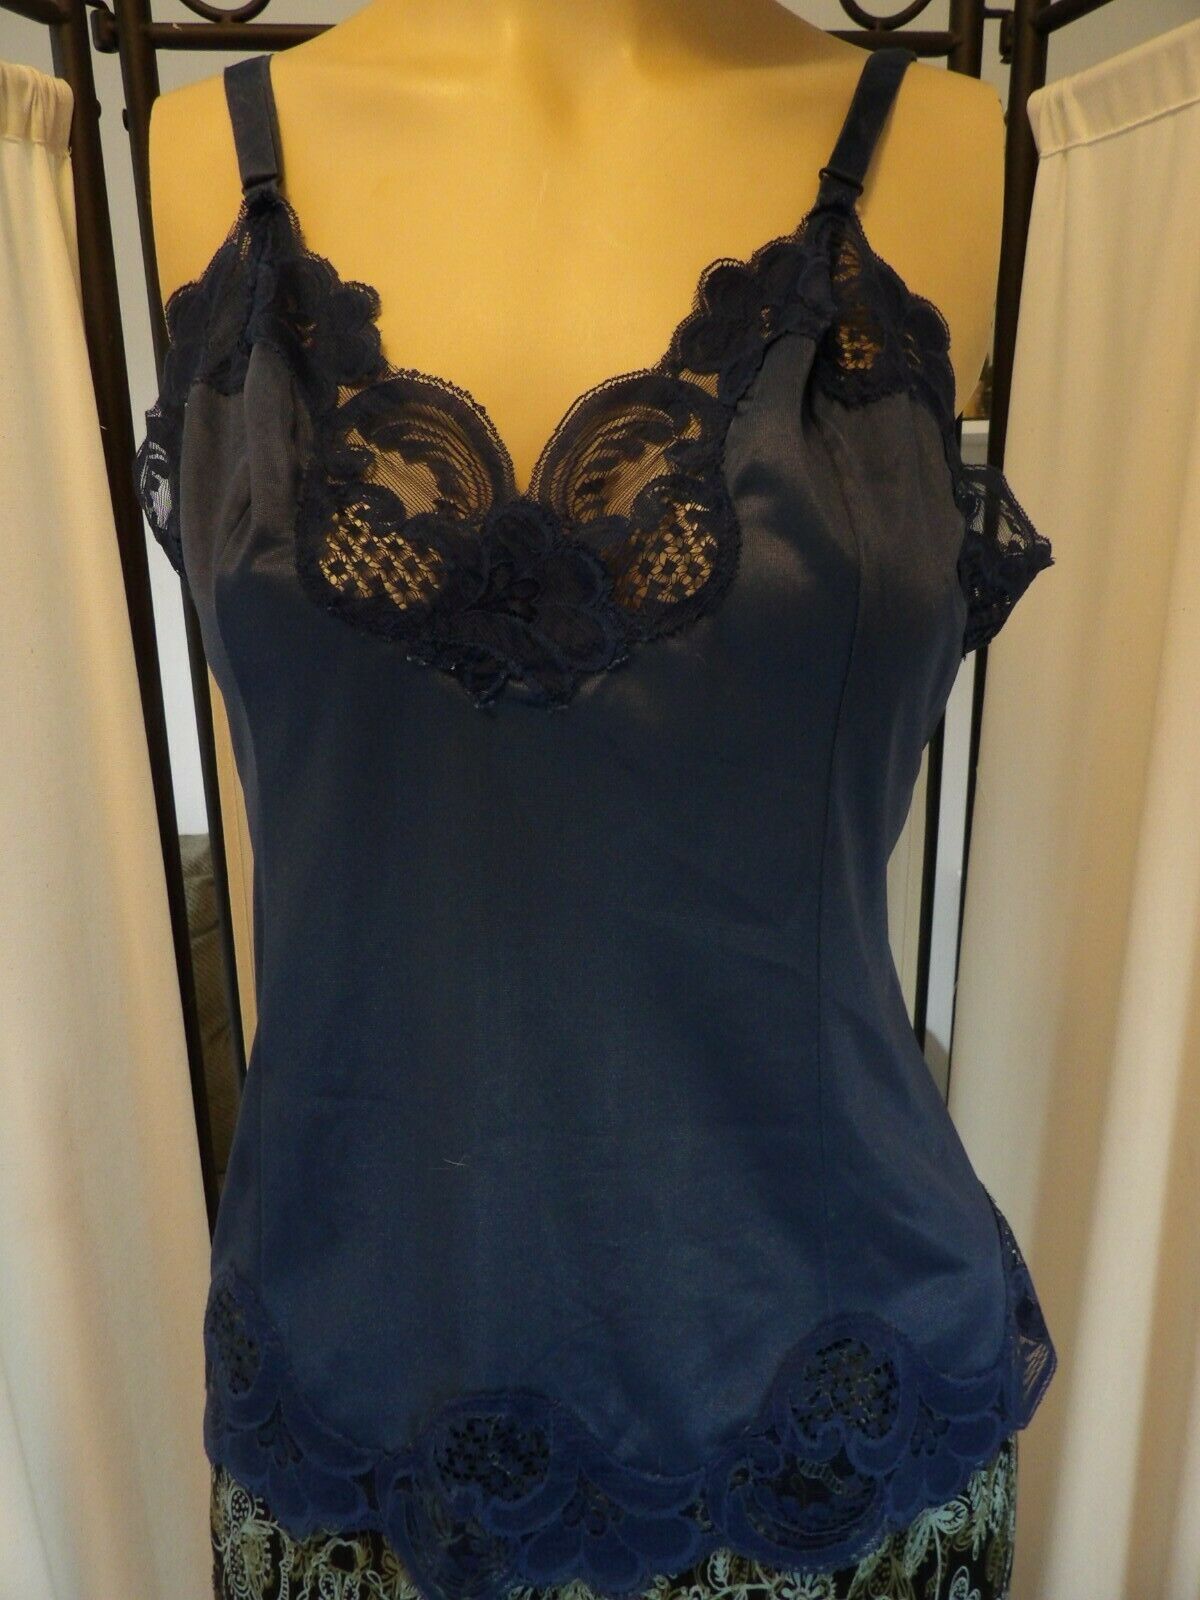 French Maid Lingerie Company 6 Panel Camisole, Size 38, Blue And Lace